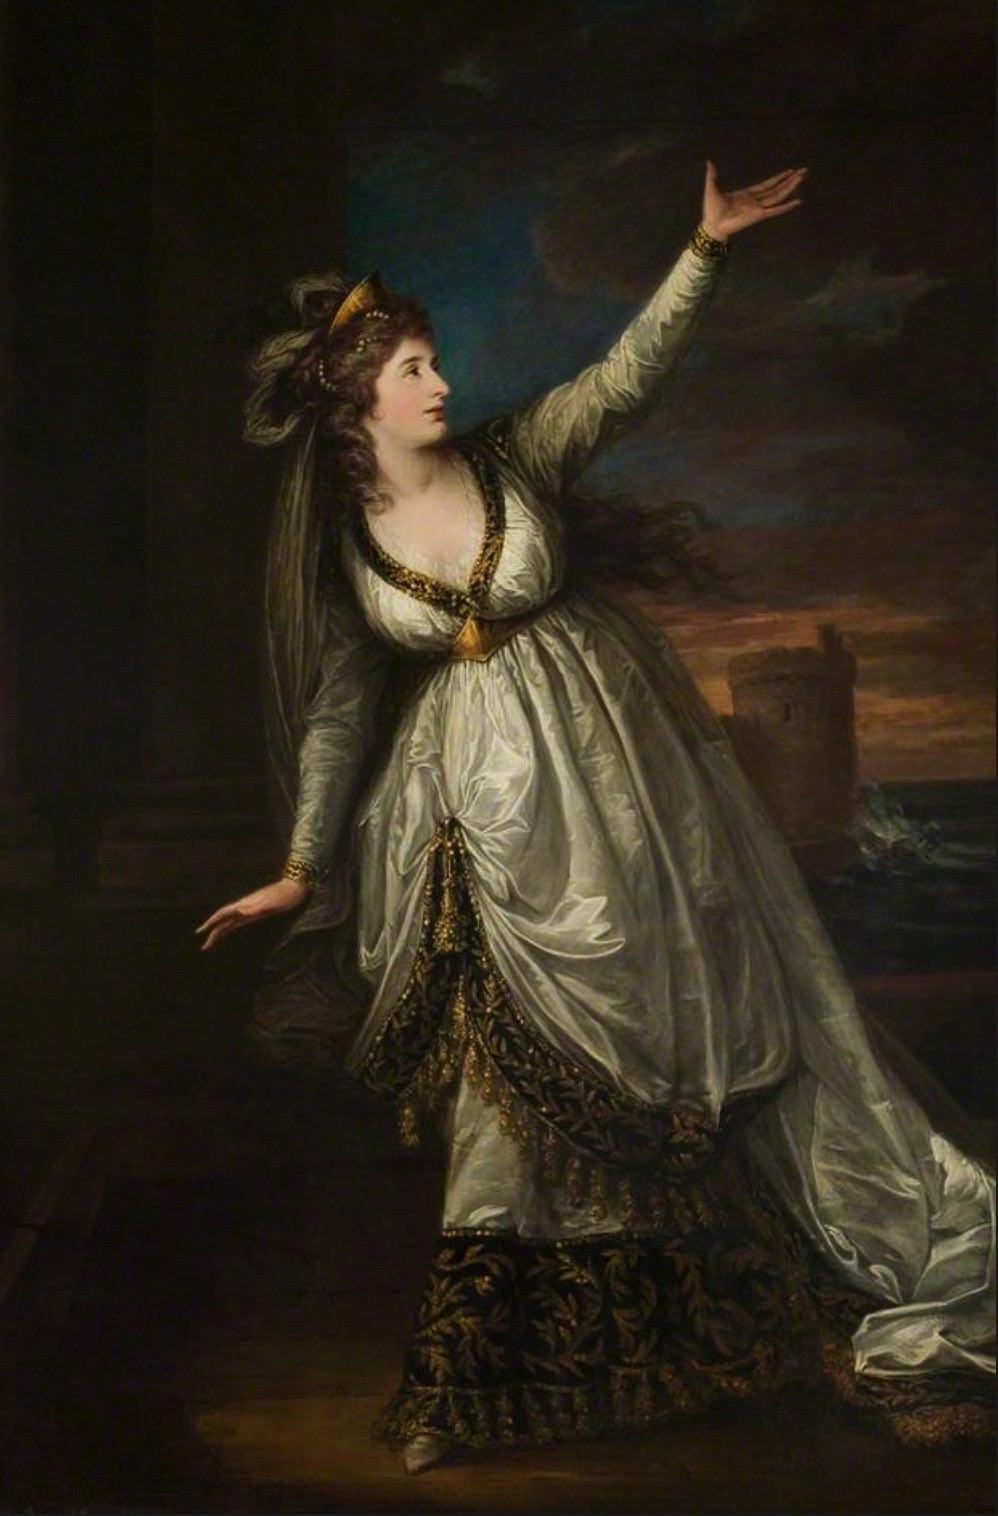 1784, oil on canvas, 270 x 155 cm. Collection of Stratford-upon-Avon Town Hall ( TH14).